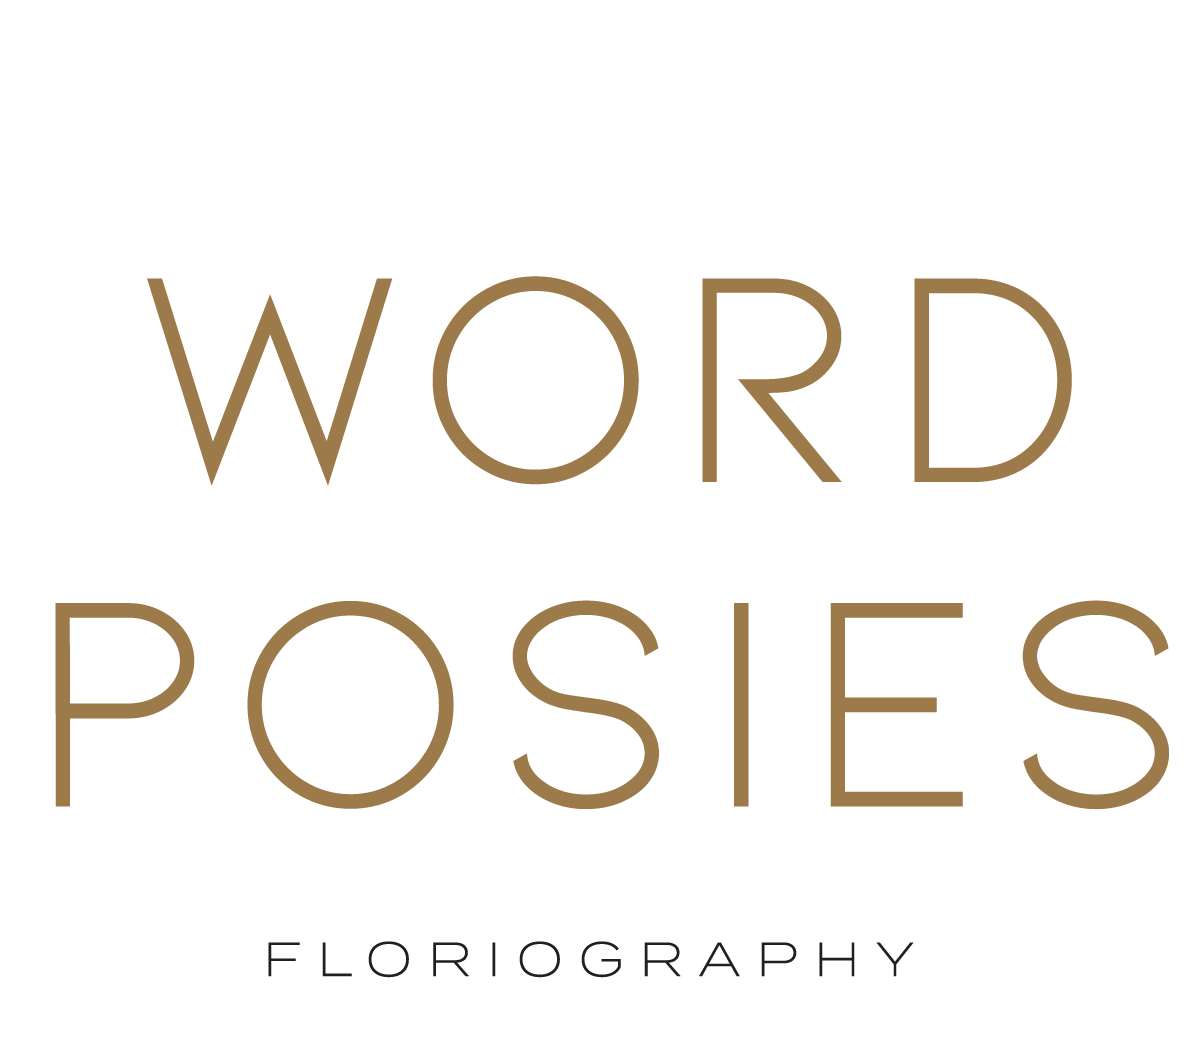 Word Posies Floriography